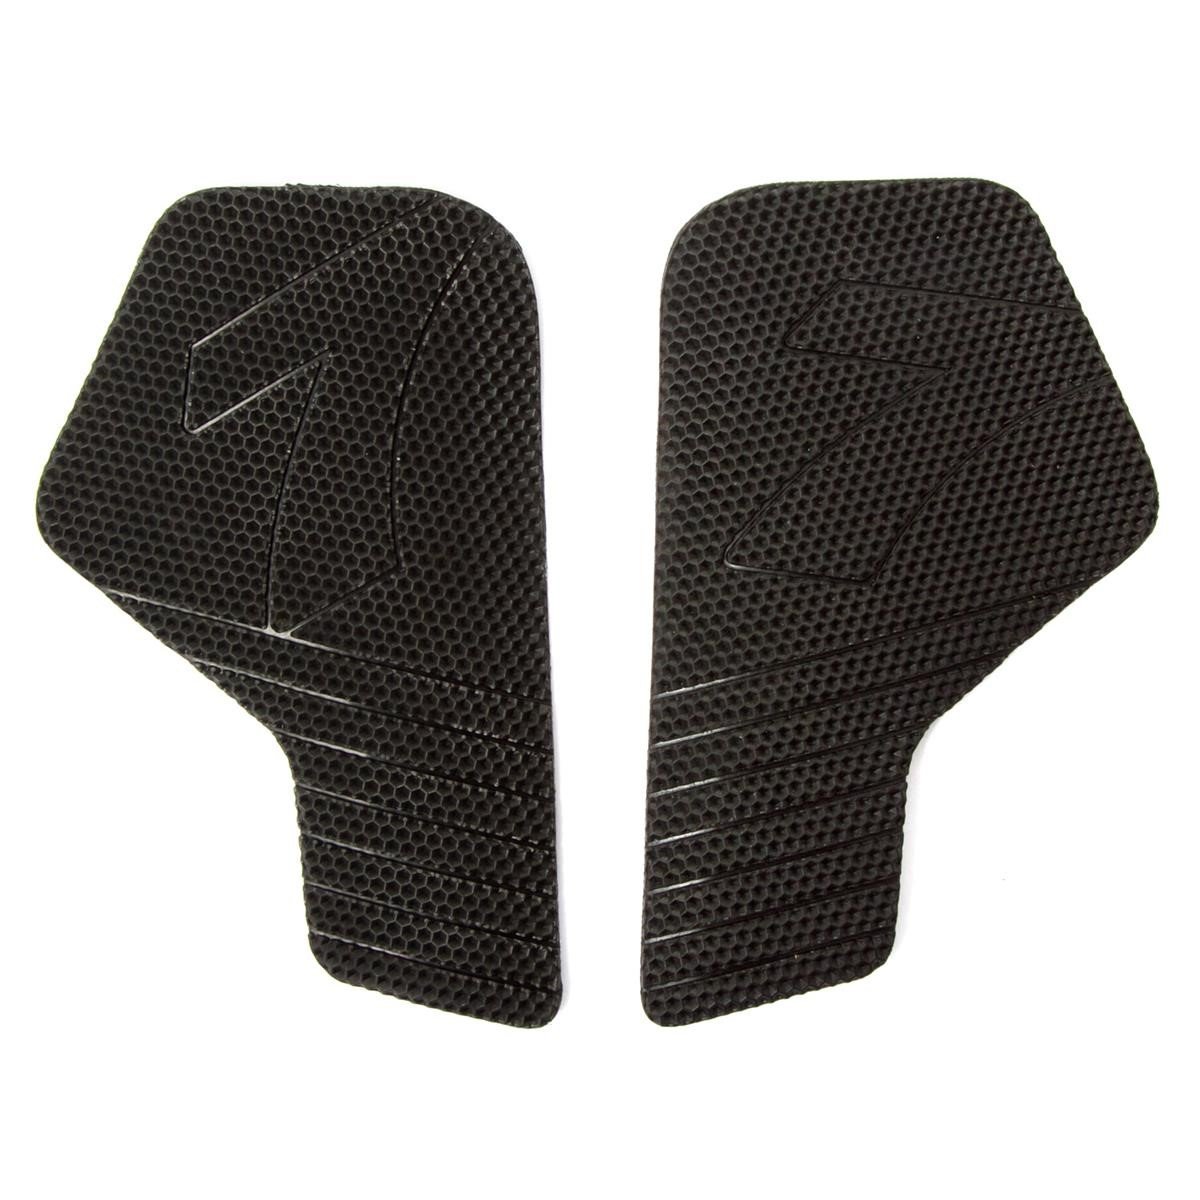 Alpinestars Replacement Boot Protector Tech 7 / Enduro Medial Protector Rubber Insert Black